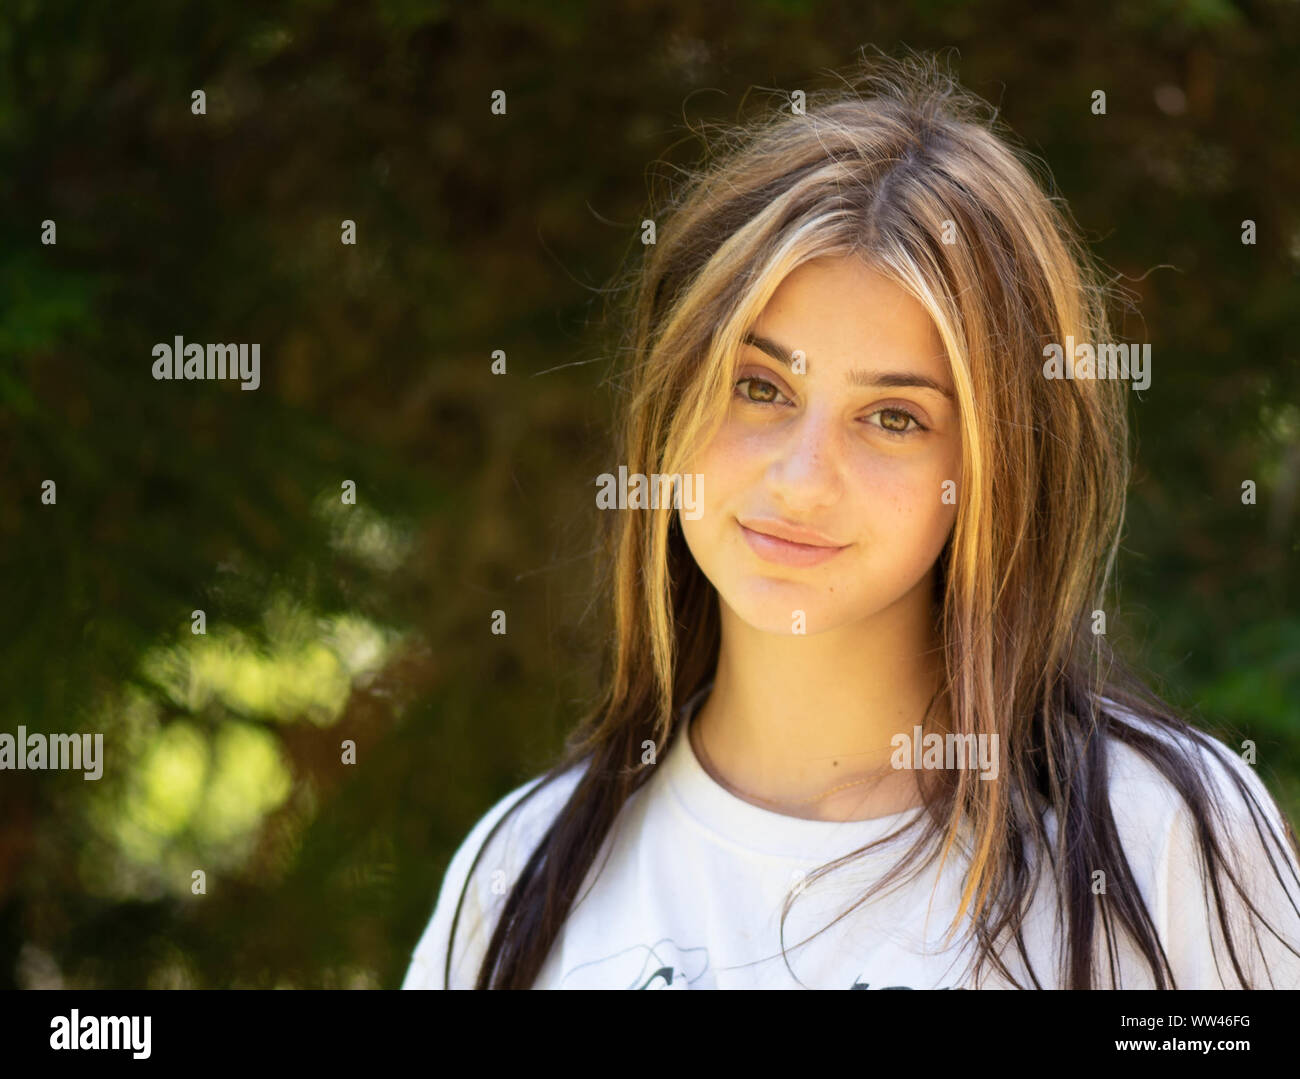 Beautiful natural close up portrait of a young woman on a blurred green forest background with highlights in her hair having an attitude. Stock Photo